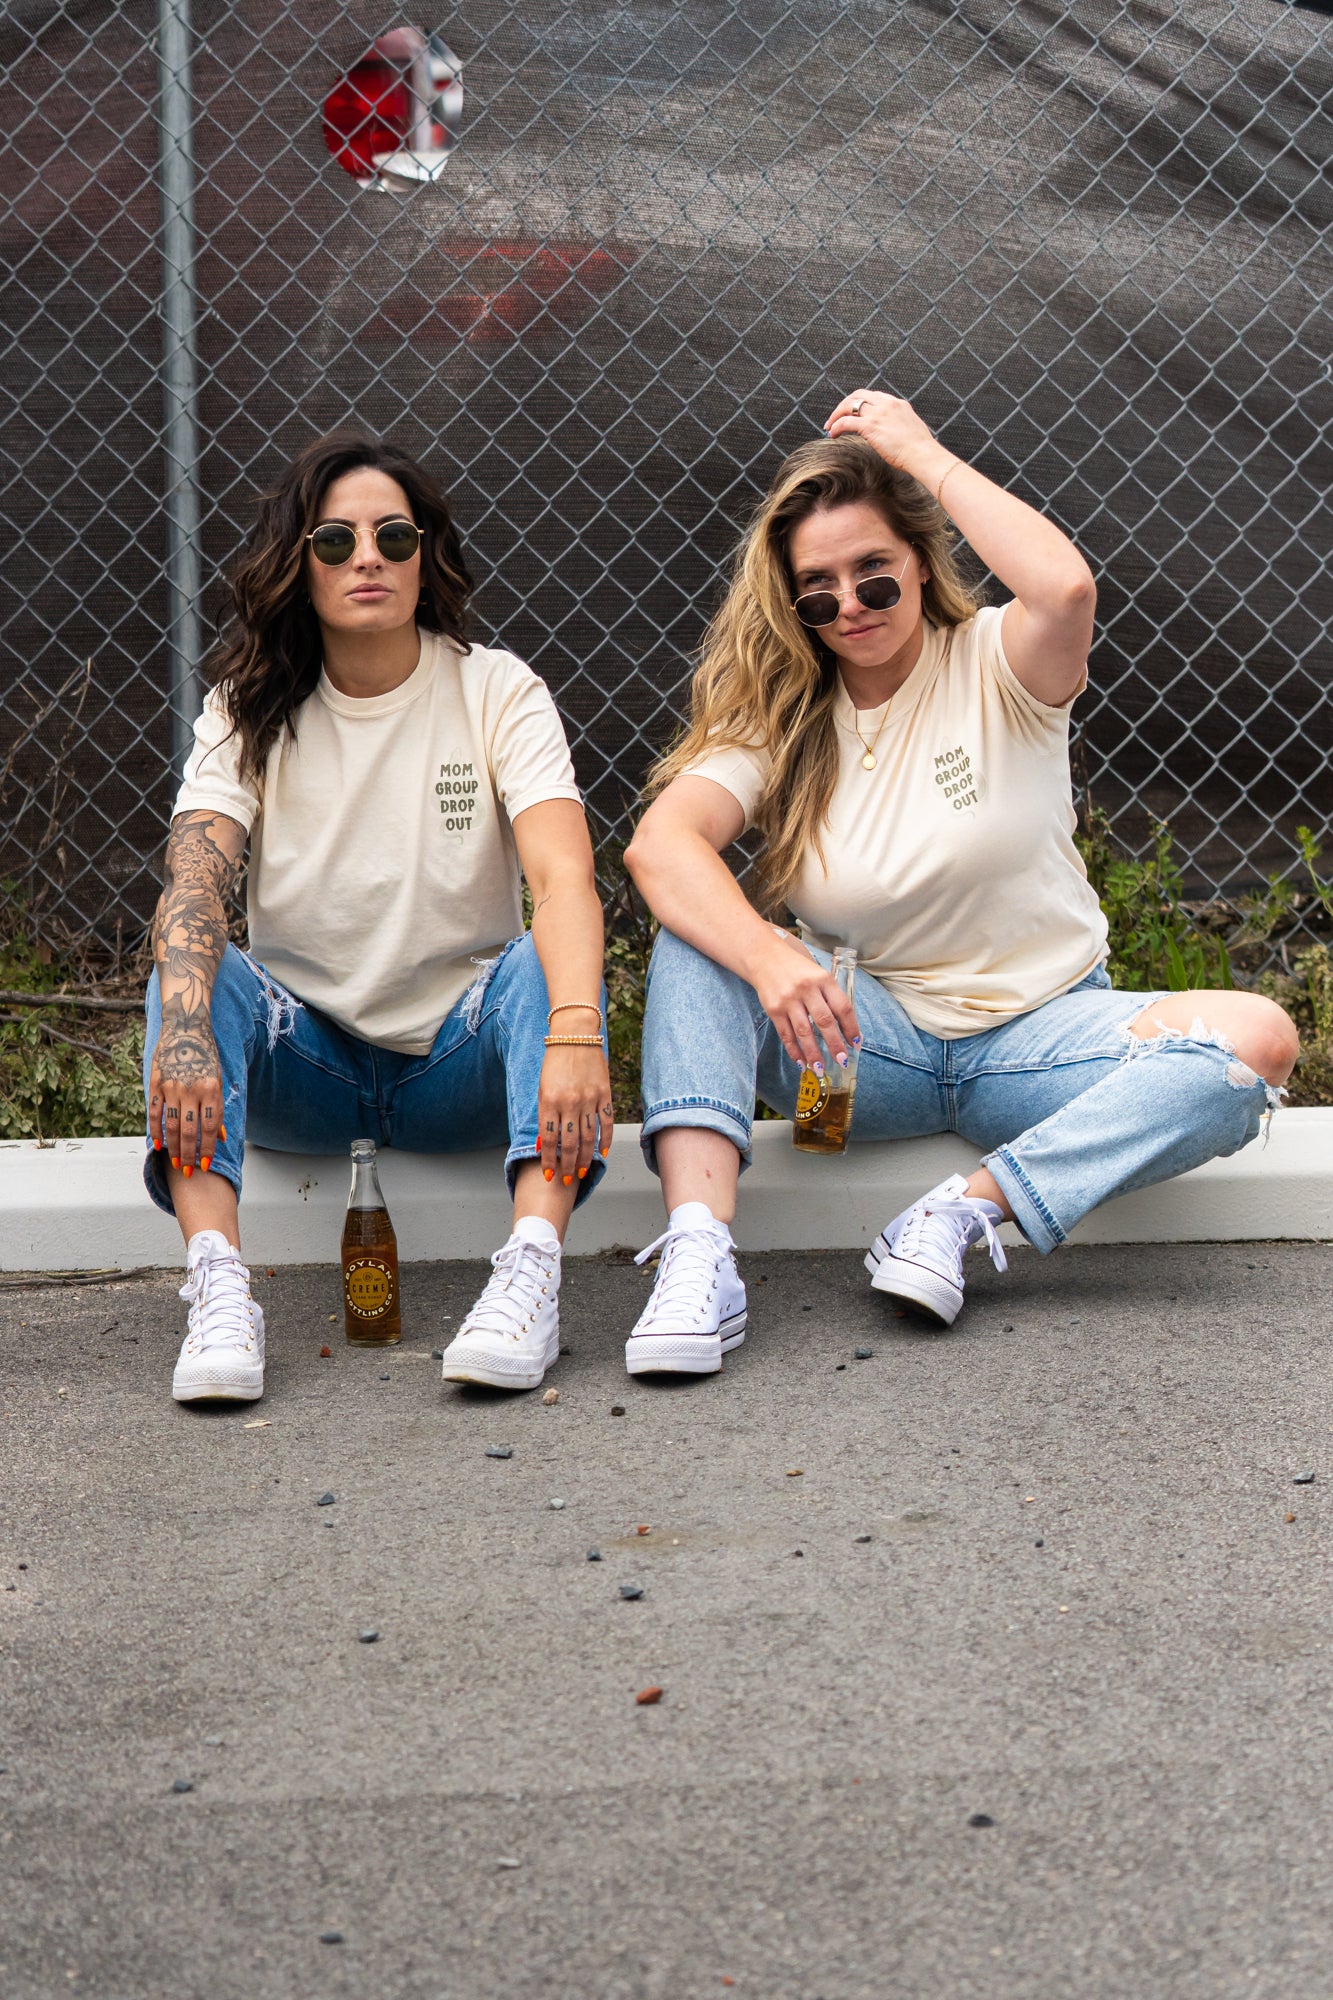 Mom Group Dropout (Front, Back) - Cropped Tee (Vintage Natural)